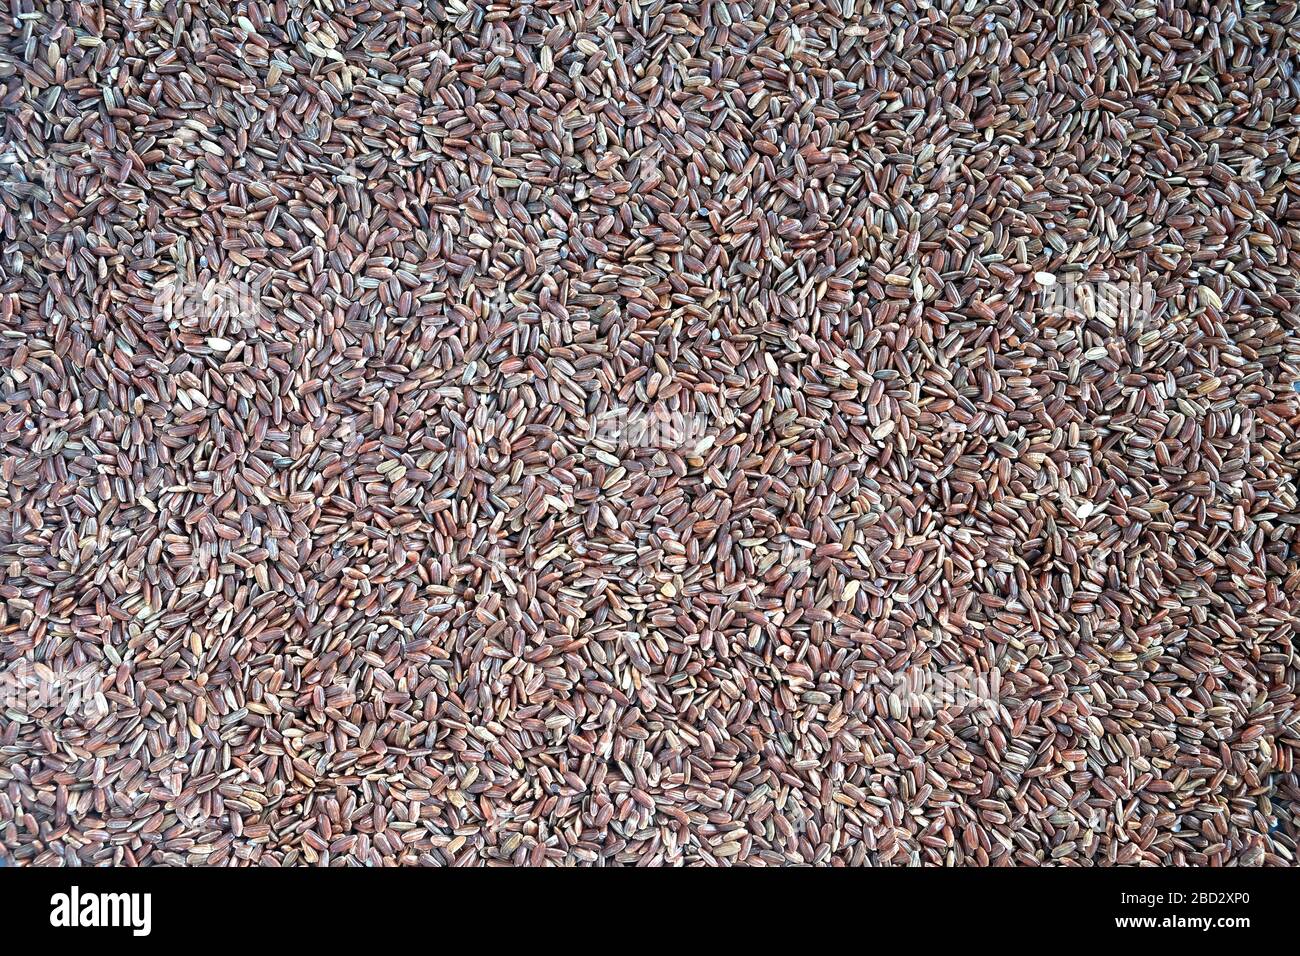 Food supplies. Crop of many dry brown rice grains on flat surface as background top view close up Stock Photo